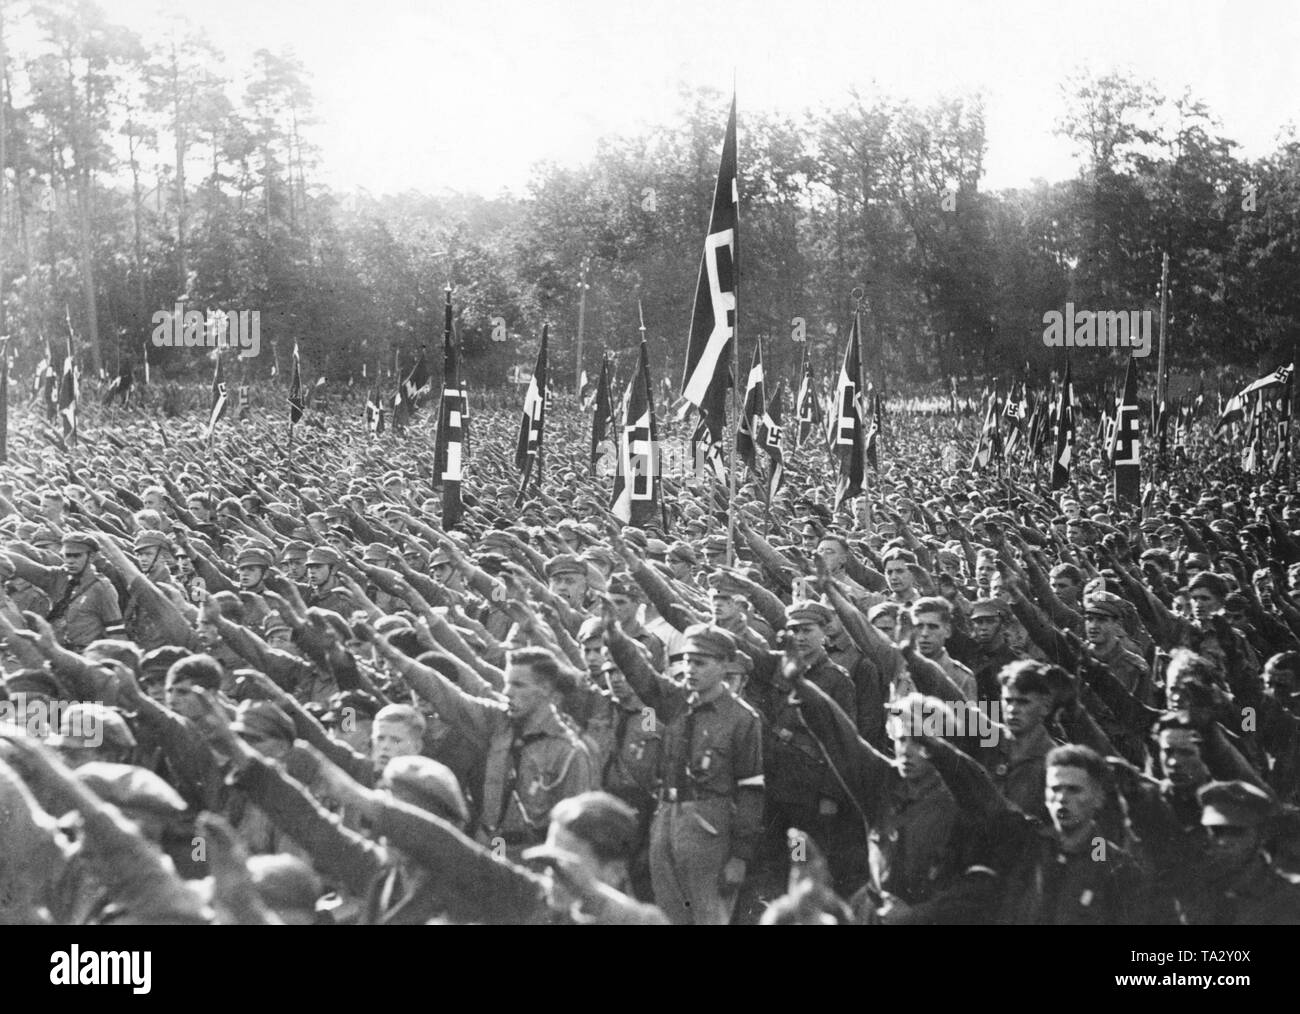 Members of the Hitlerjugend march in the Potsdamer Stadion on the Reichsjugendtag (Reich Youth Day) and show the Nazi salute, while Adolf Hitler speaks to them. Stock Photo